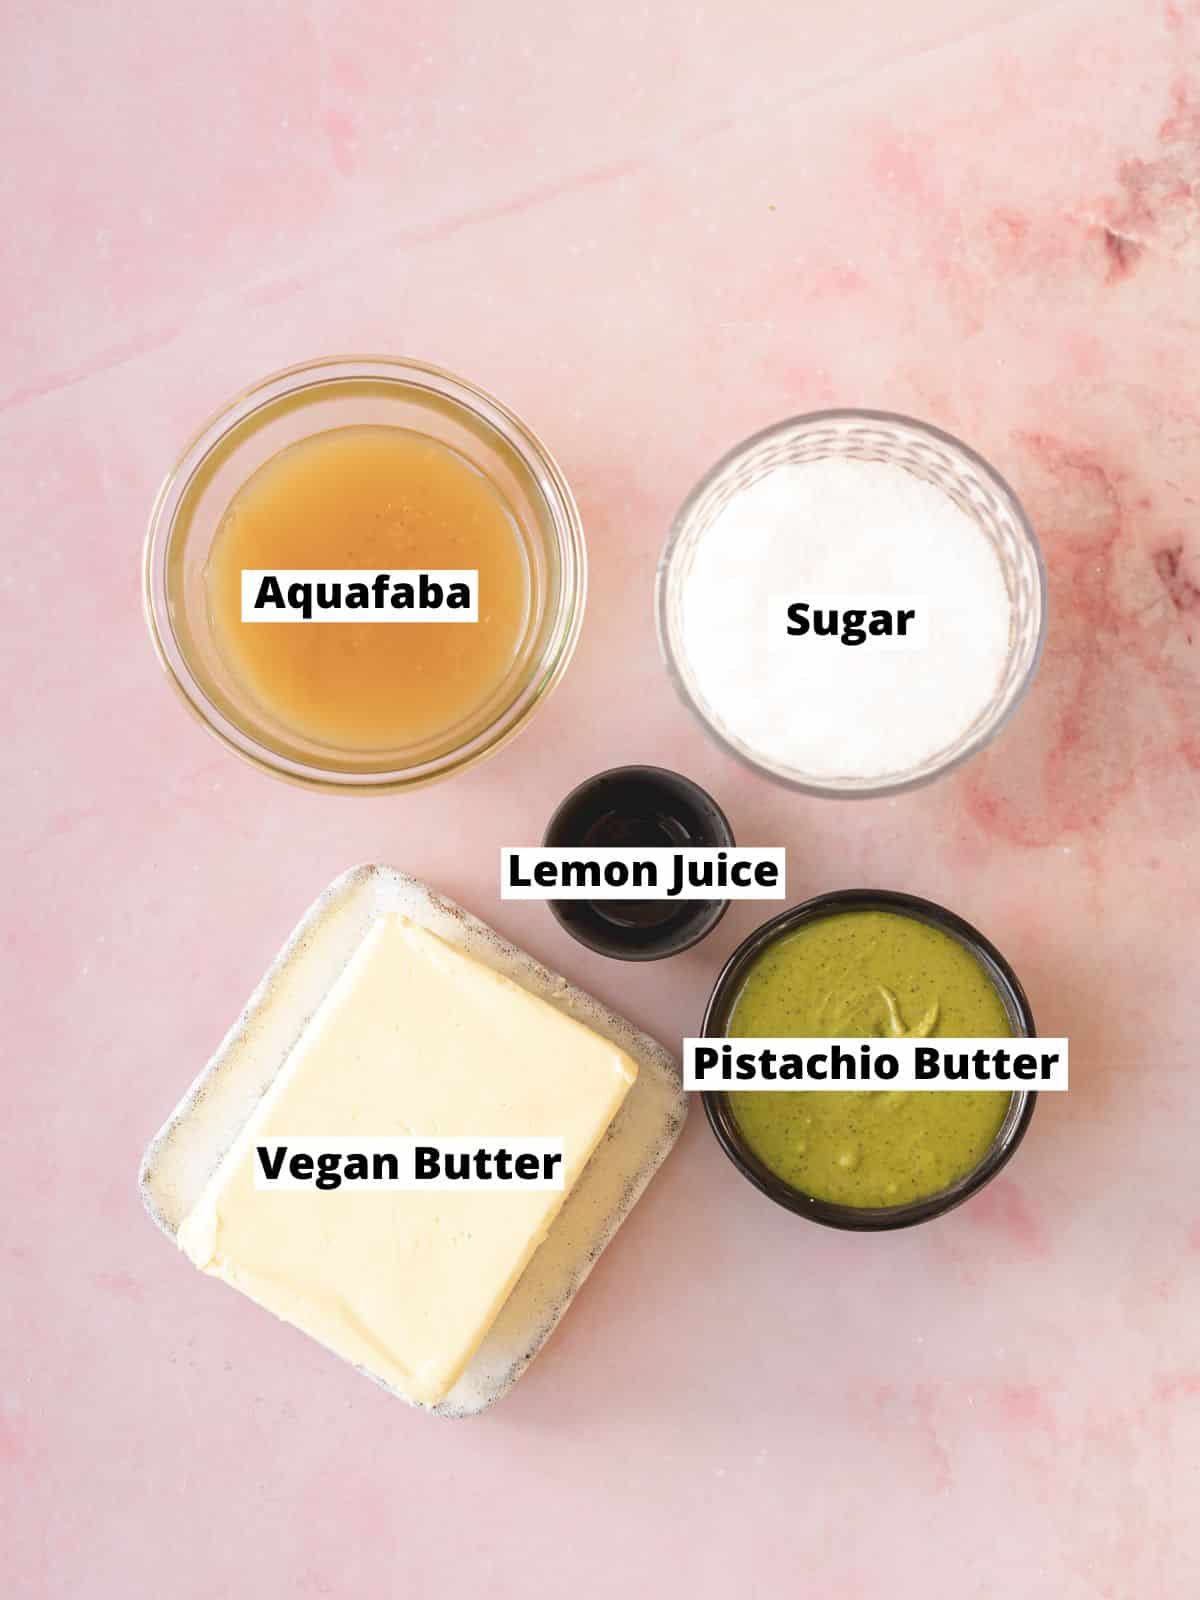 ingredients for vegan pistachio frosting measured out in bowls on top of a pink marble surface.